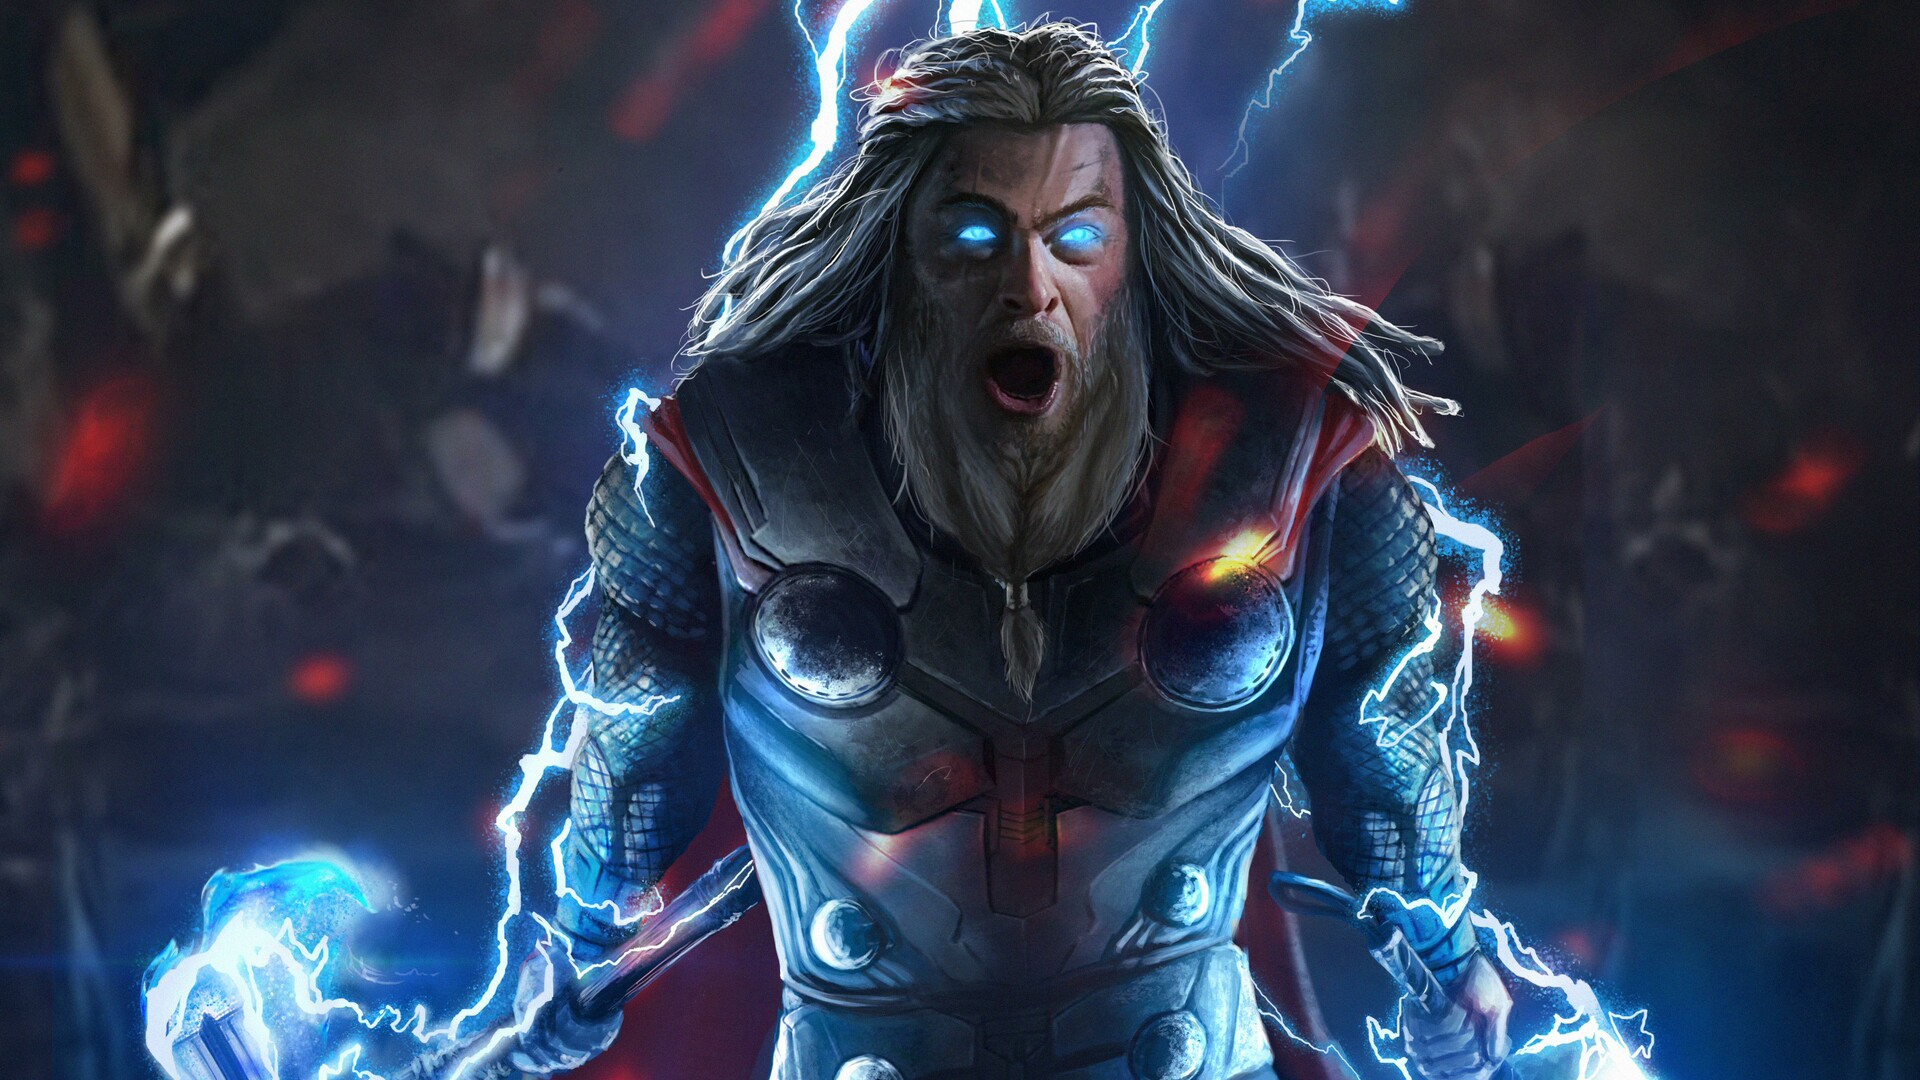 Thor HD Wallpaper | Background Image | 1920x1080 | ID ...